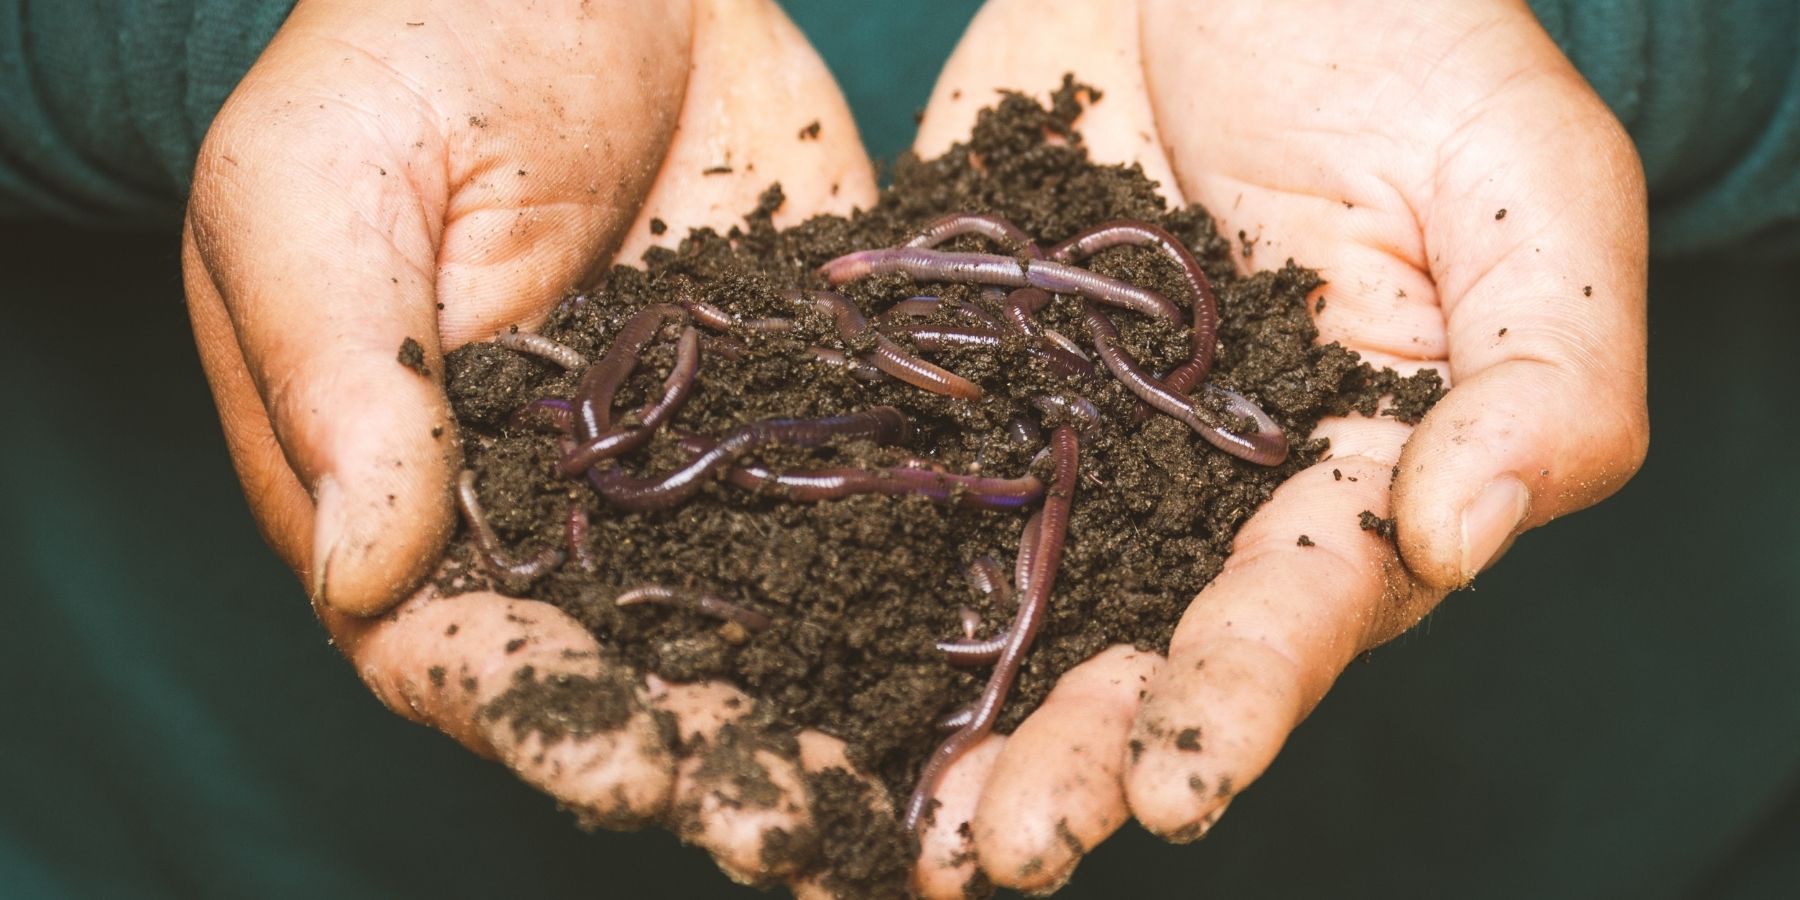 A pair of cupped hands hold a handful of brown soil containing lots of earthworms